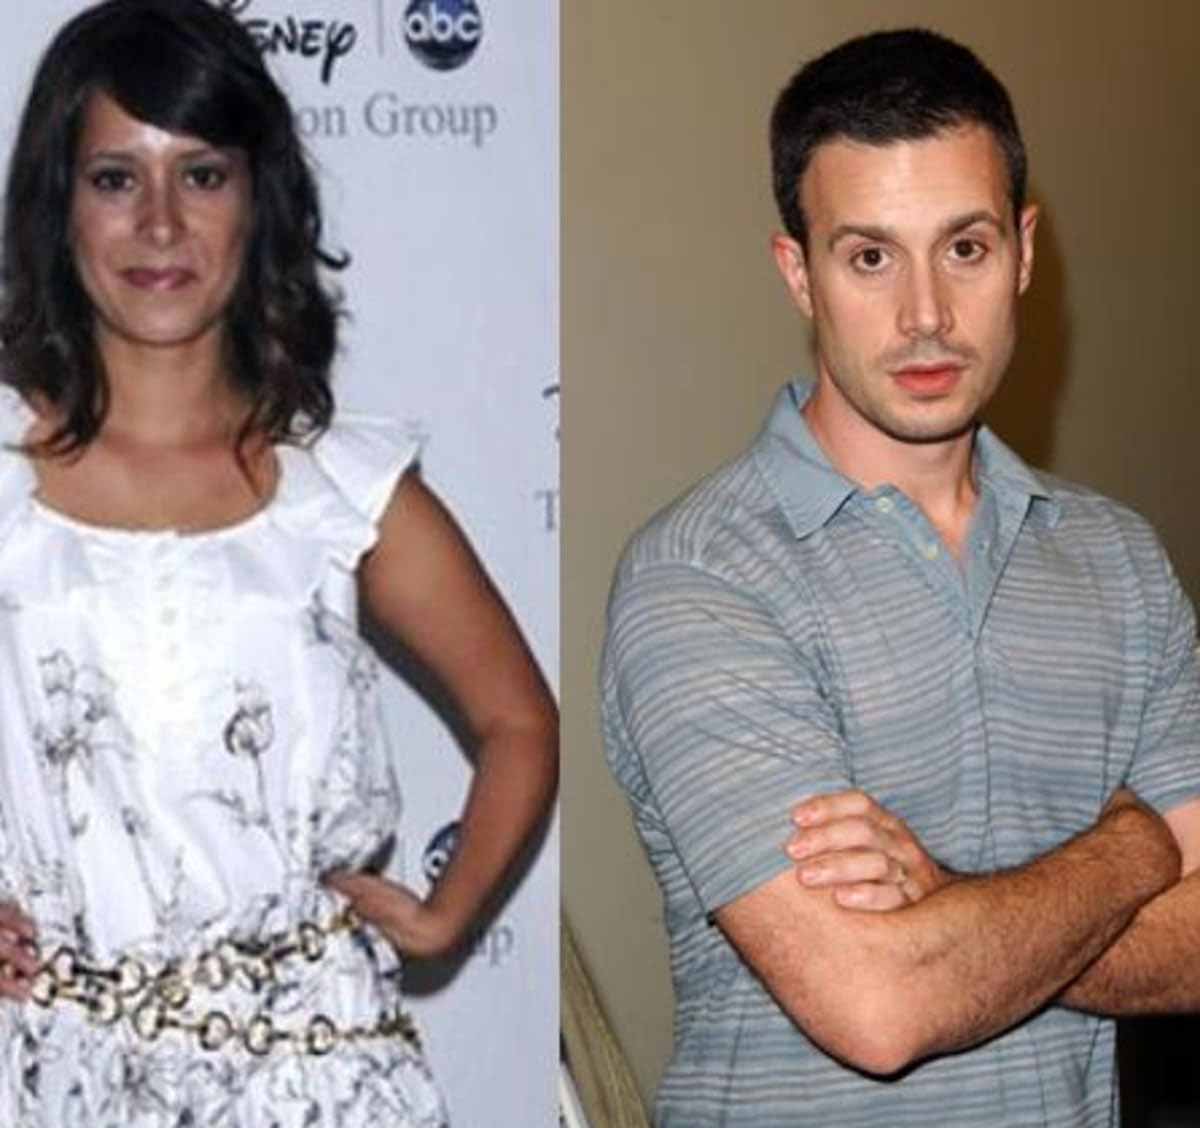 Photo of Kimberly McCullough and her ex-boyfriend Freddie Prinze Jr.